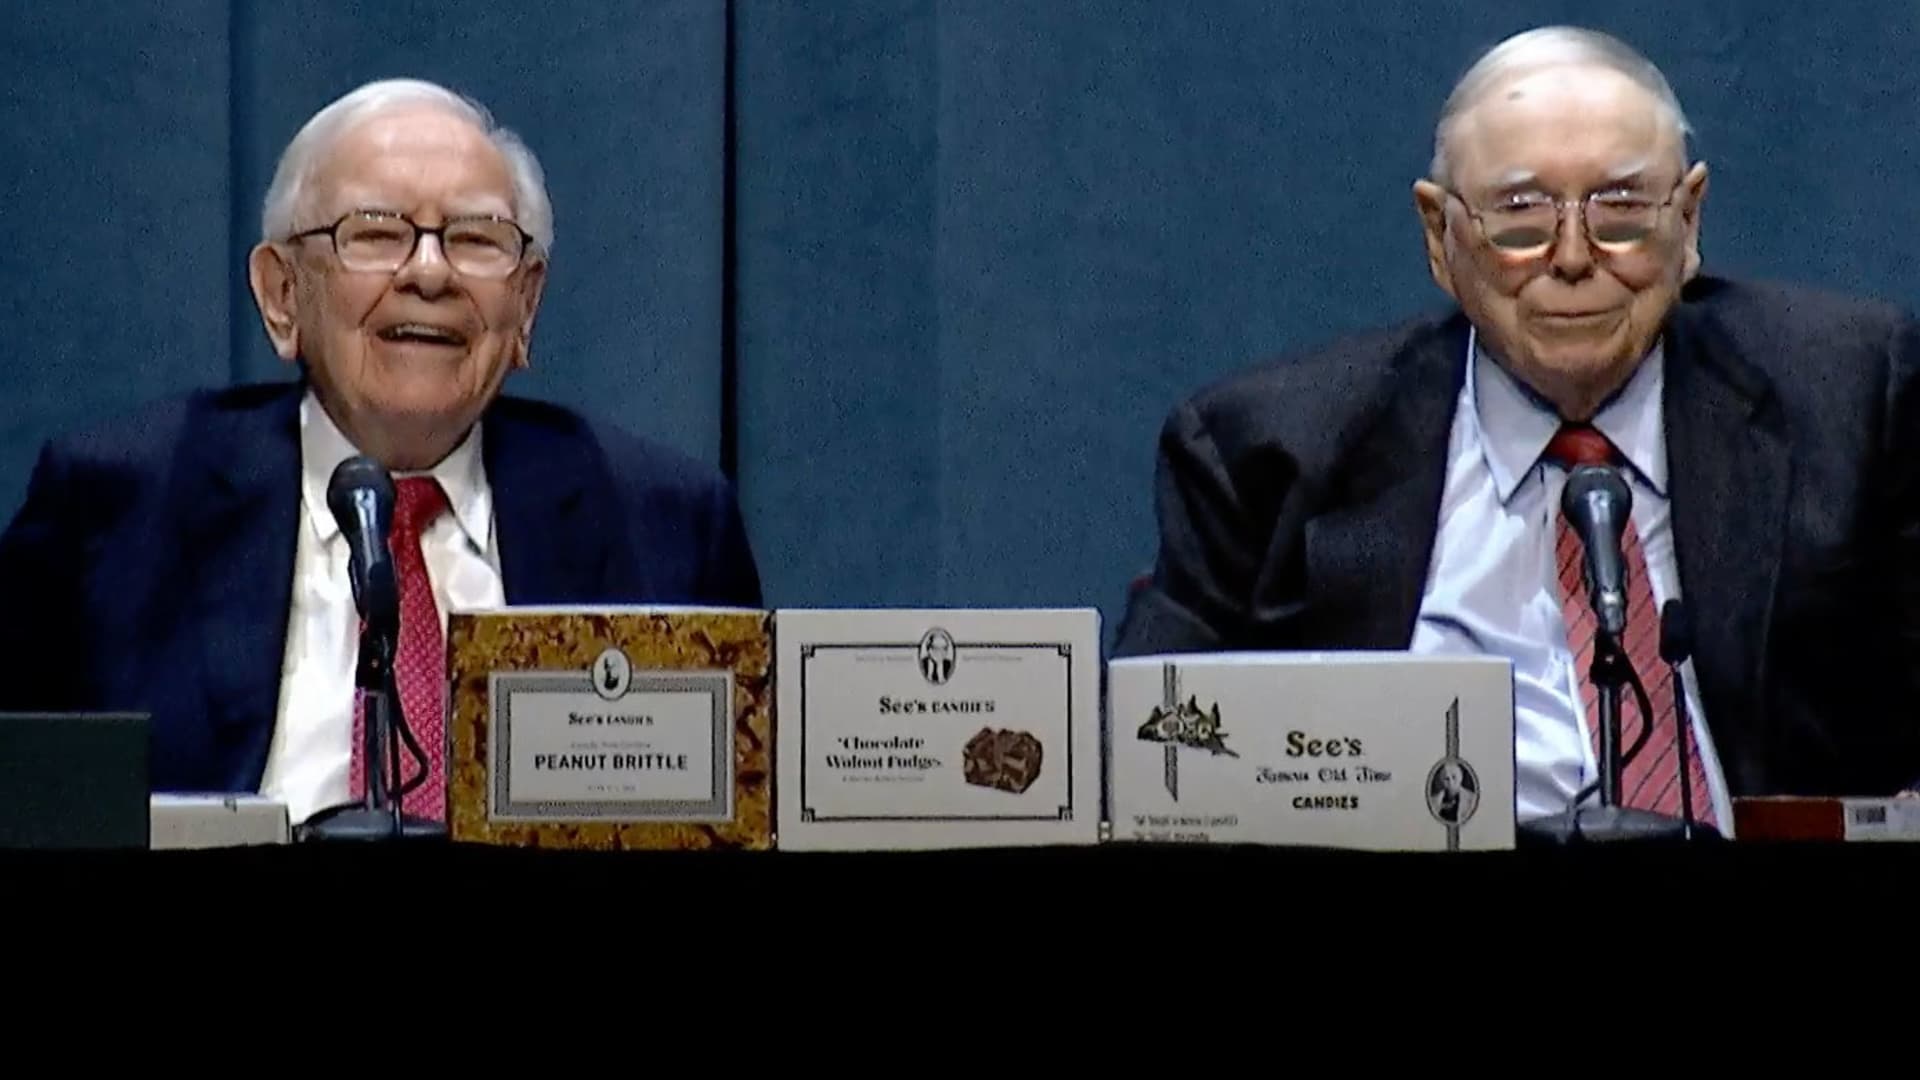 These stocks owned by Warren Buffett are poised for big gains, according to Wall Street analysts